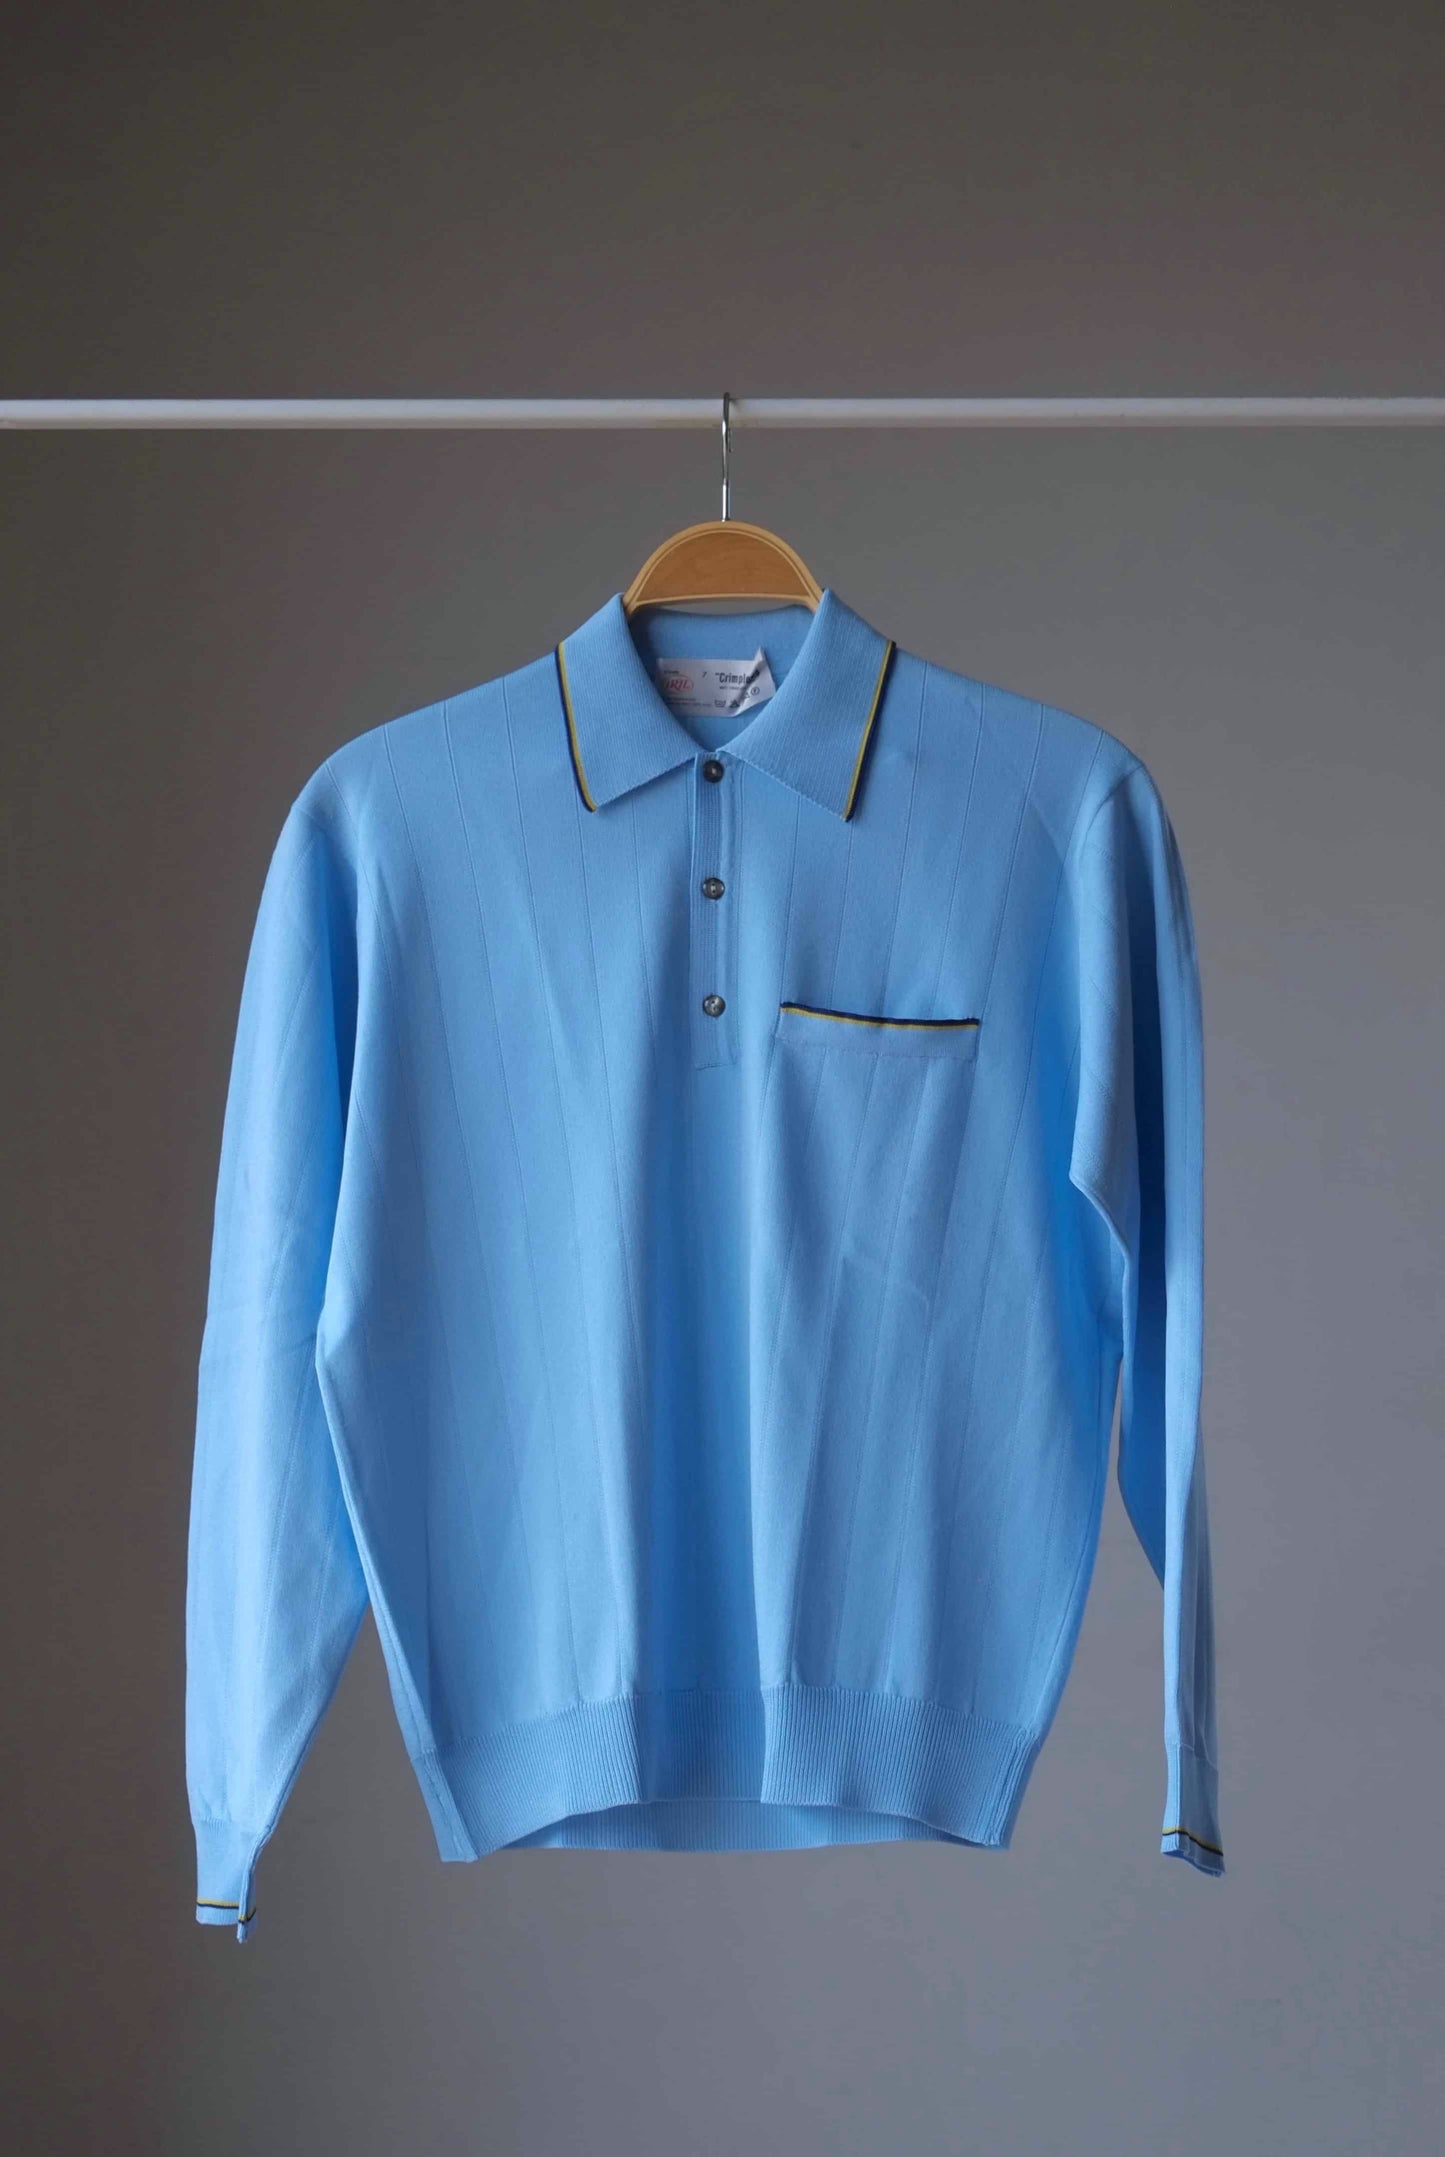  Vintage 70's Long Sleeves Knit Polo blue